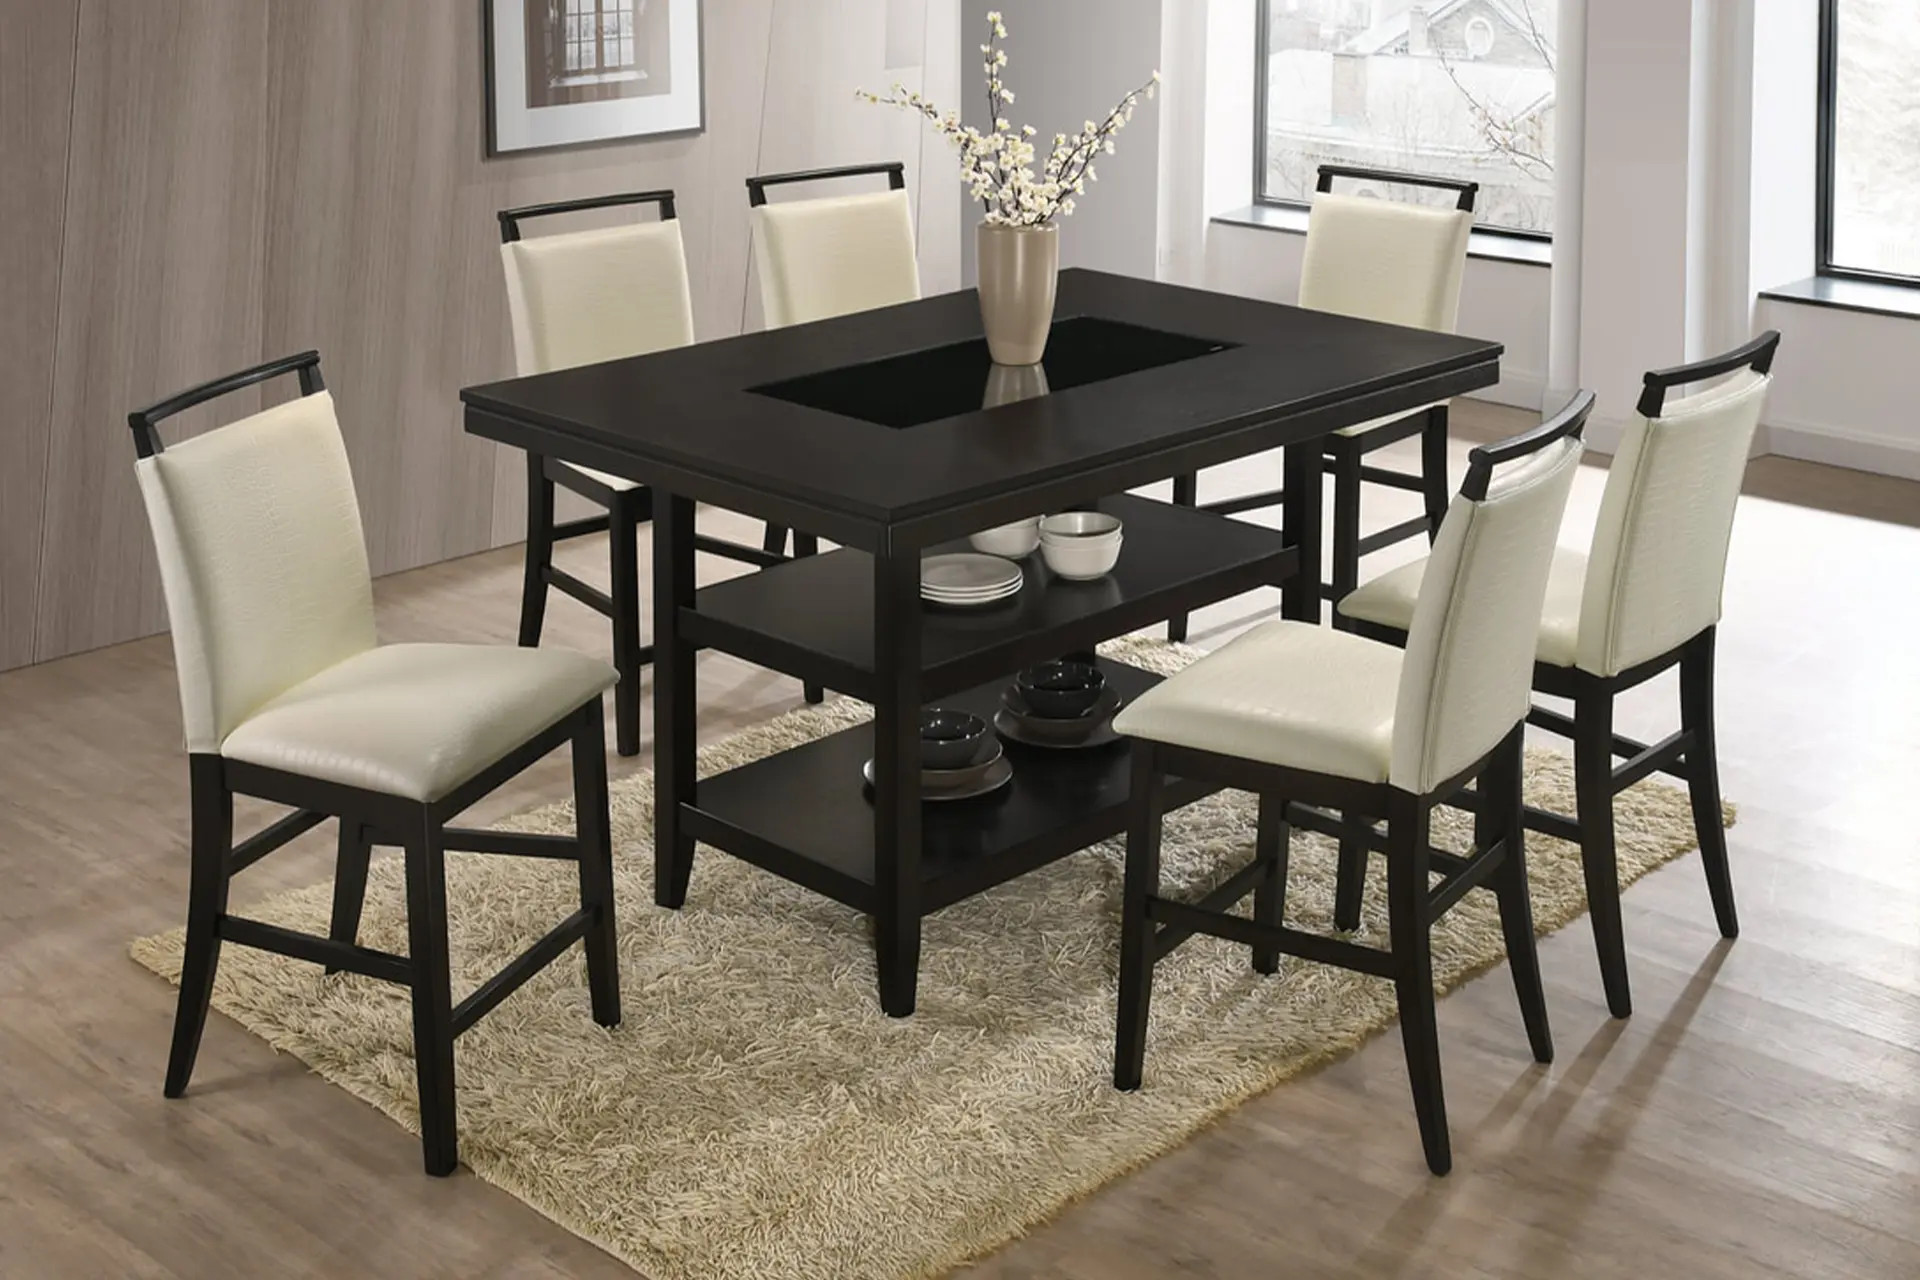 Tommy White Espresso Dining Room Set.